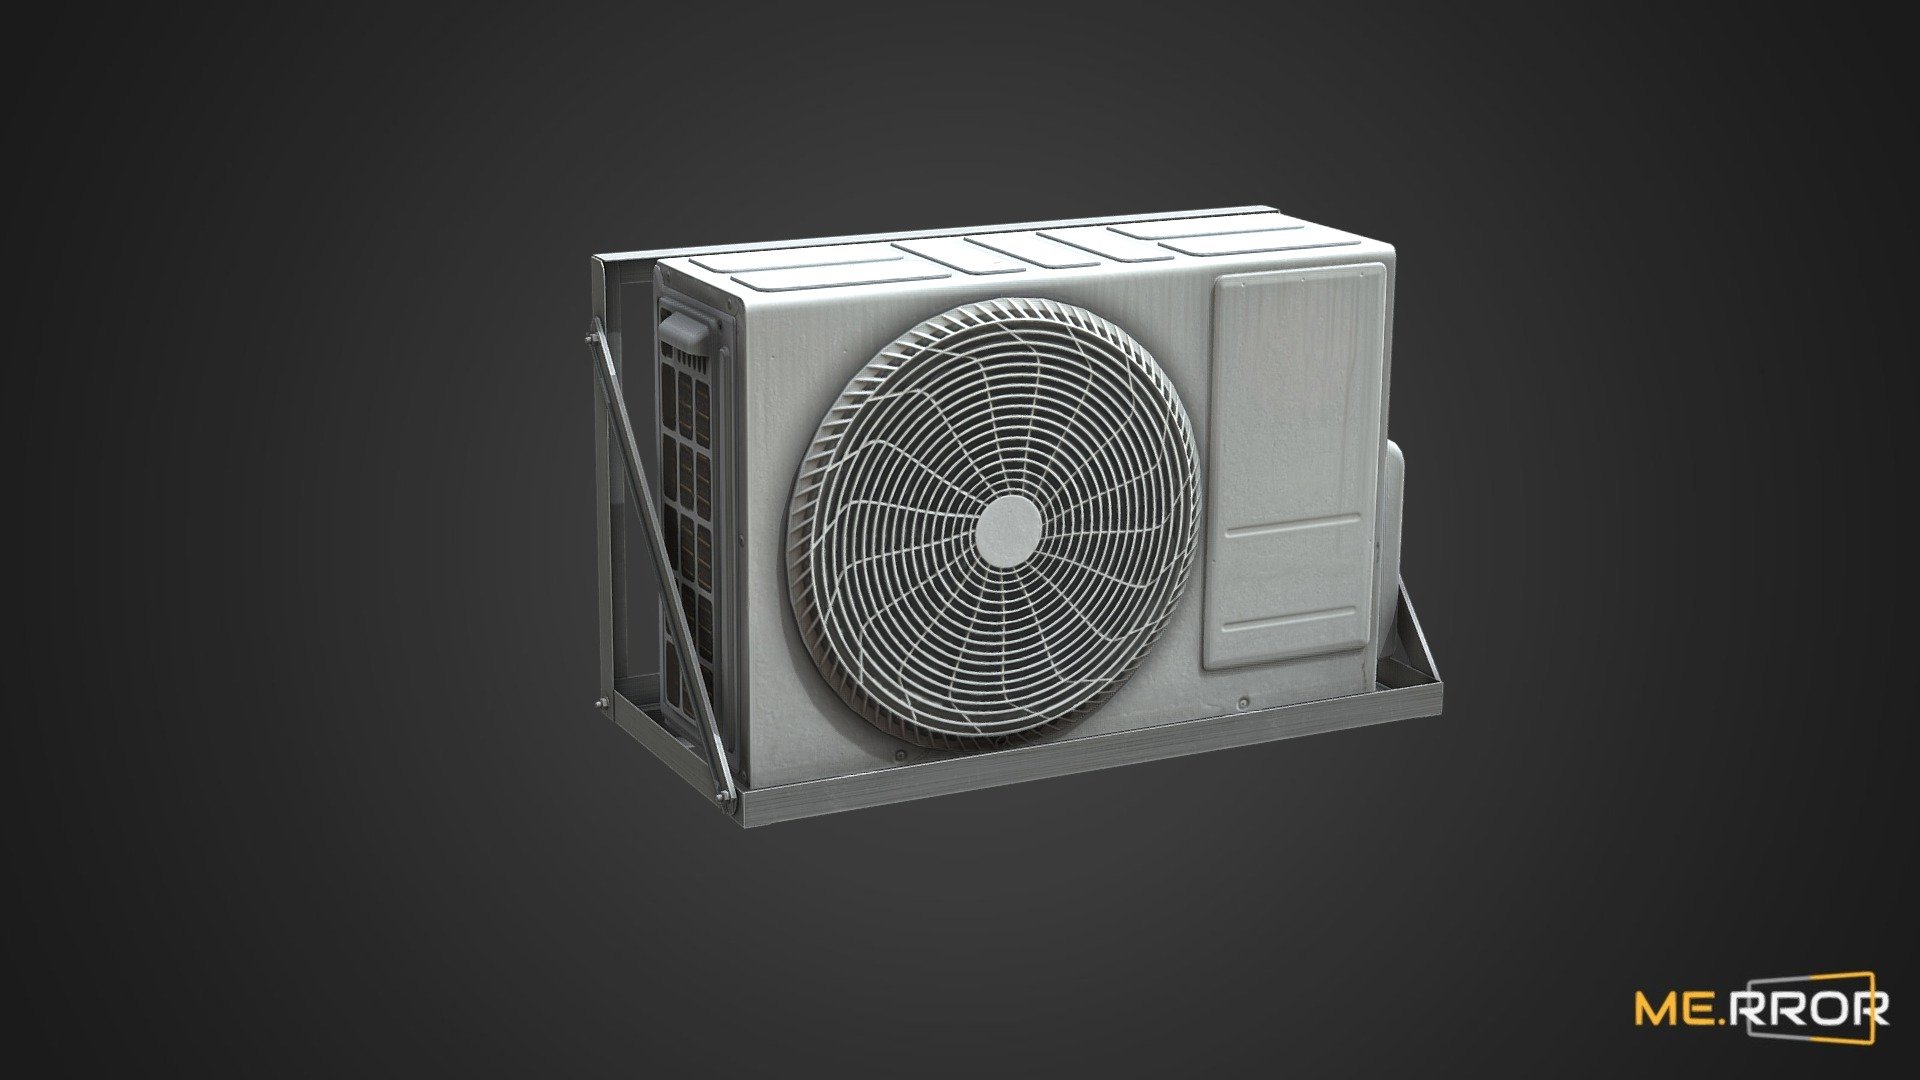 MERROR is a 3D Content PLATFORM which introduces various Asian assets to the 3D world

&lsquo;#3DScanning #Photogrametry #ME.RROR - Photogrametry Outdoor unit of Airconditioner - Buy Royalty Free 3D model by ME.RROR (@merror) 3d model